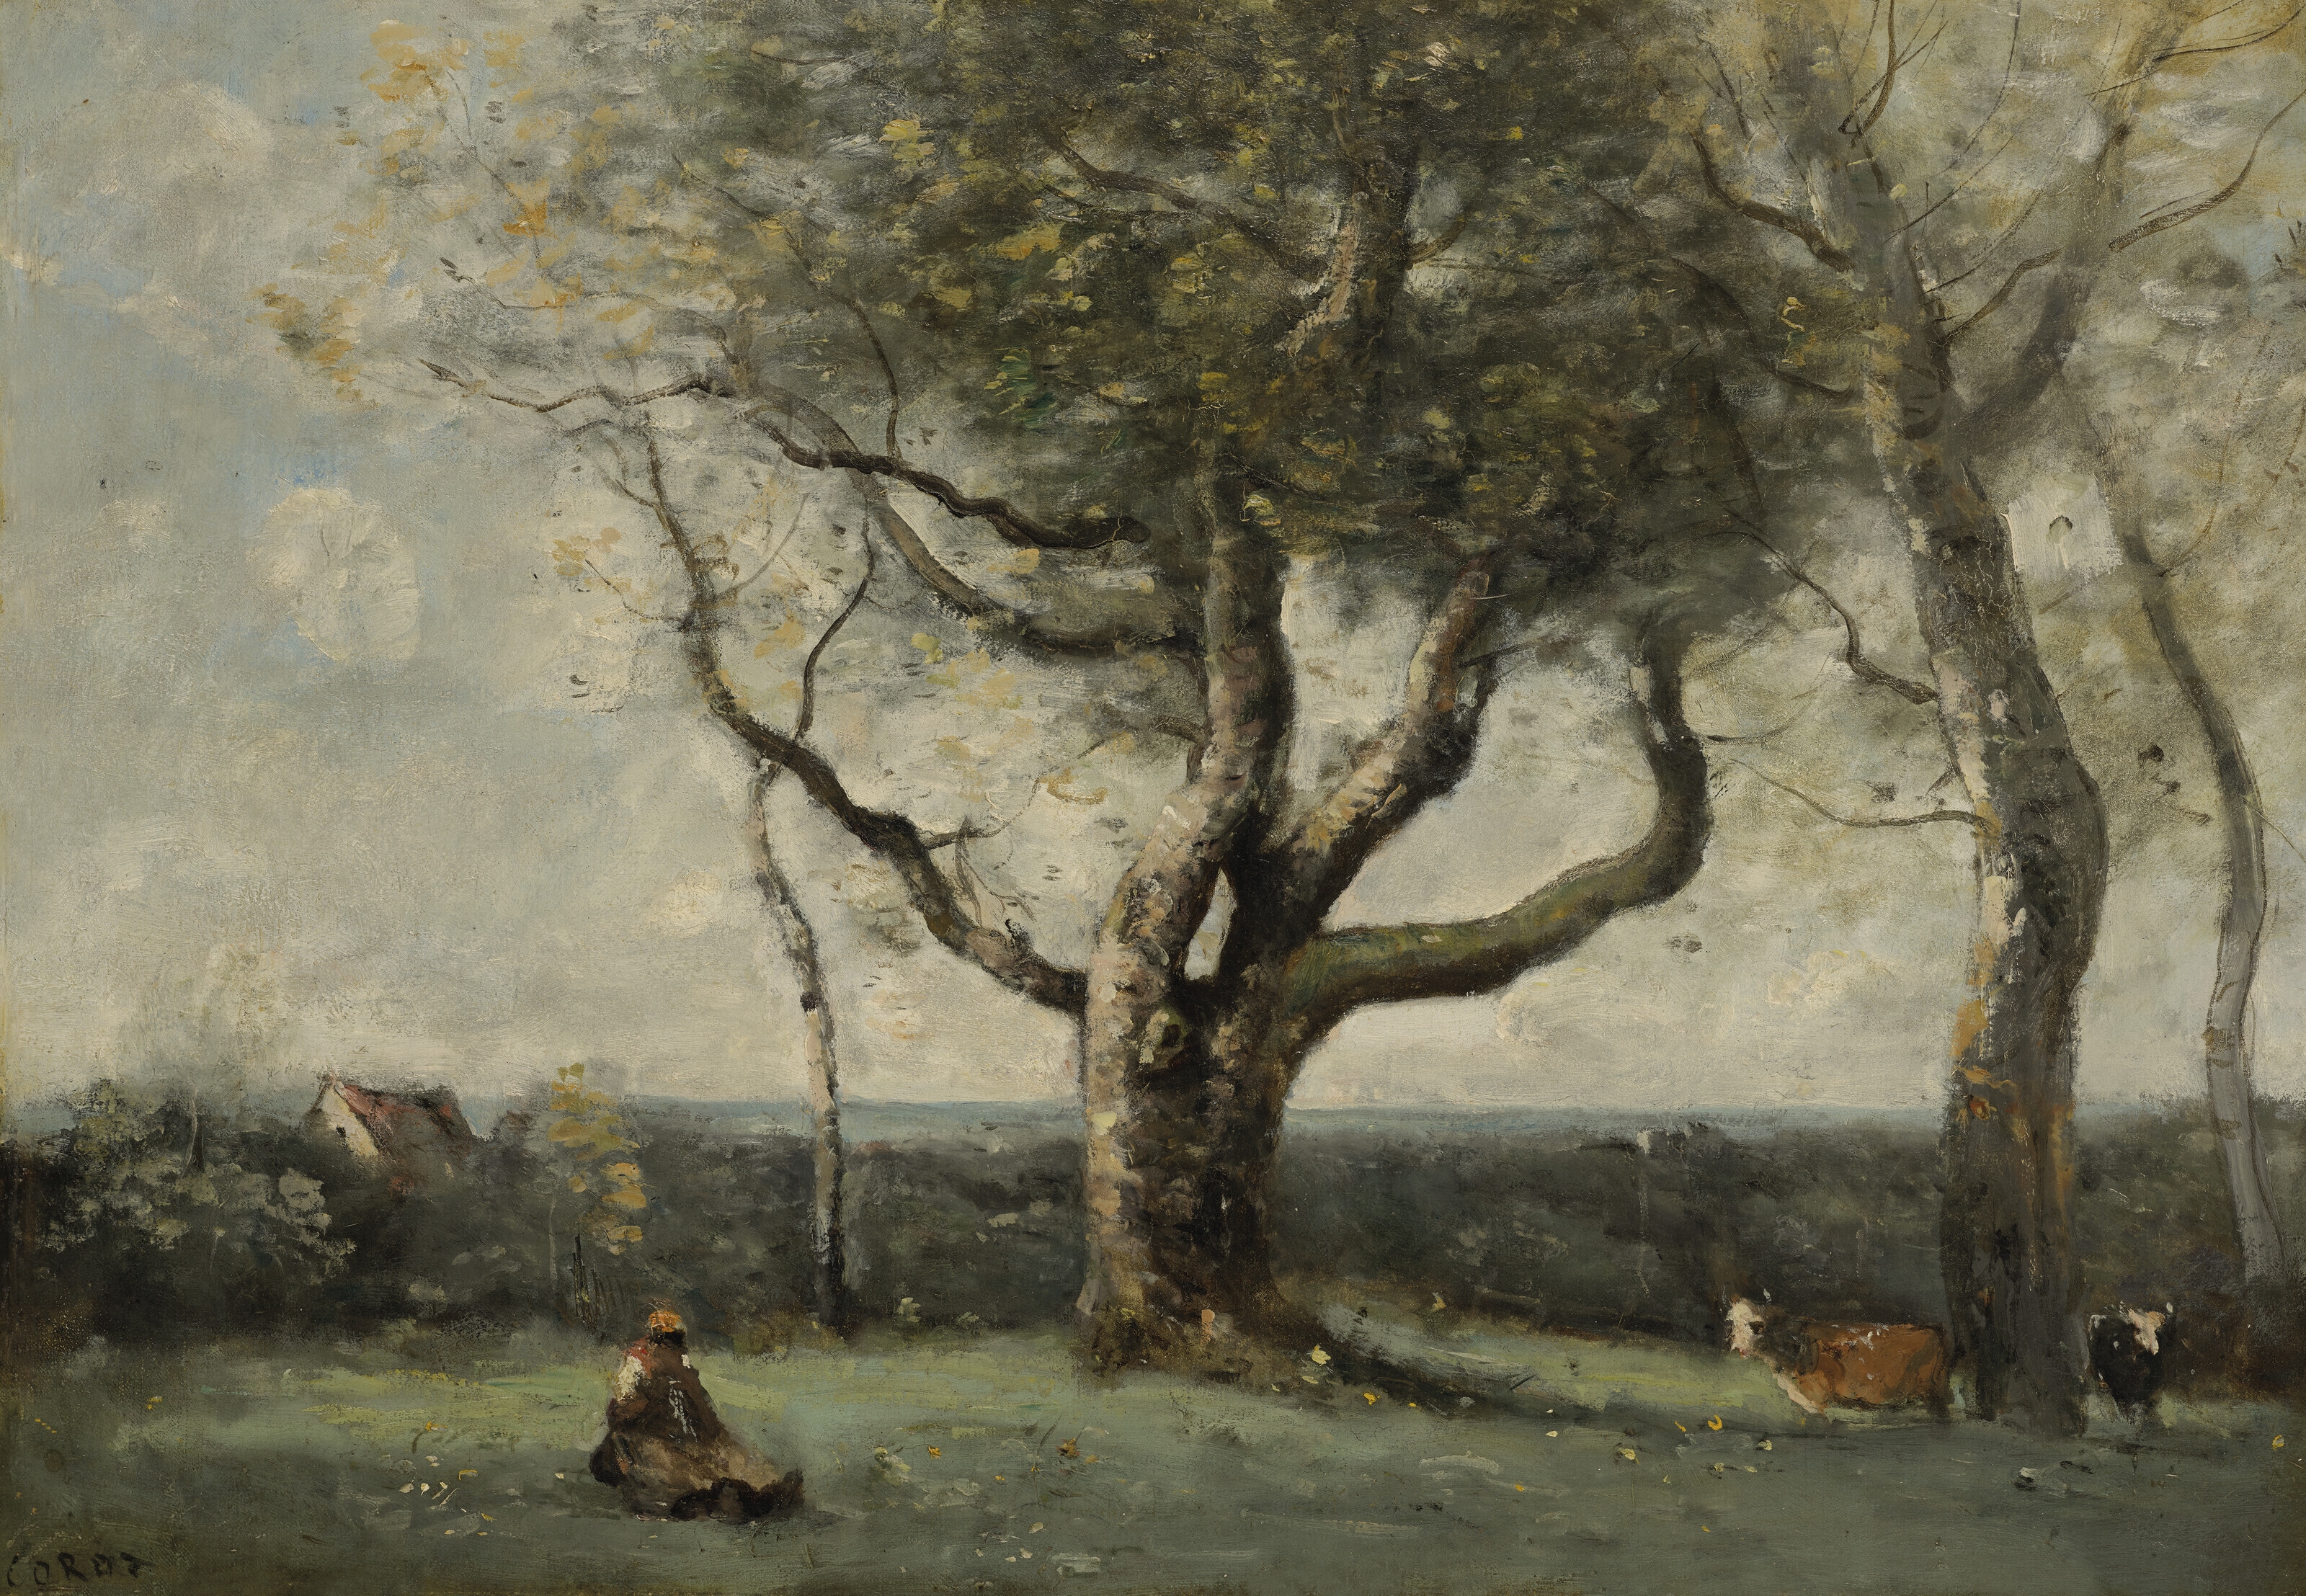 Artwork by Jean Baptiste Camille Corot, Le gros arbre (environs de Gournay), Made of oil on canvas